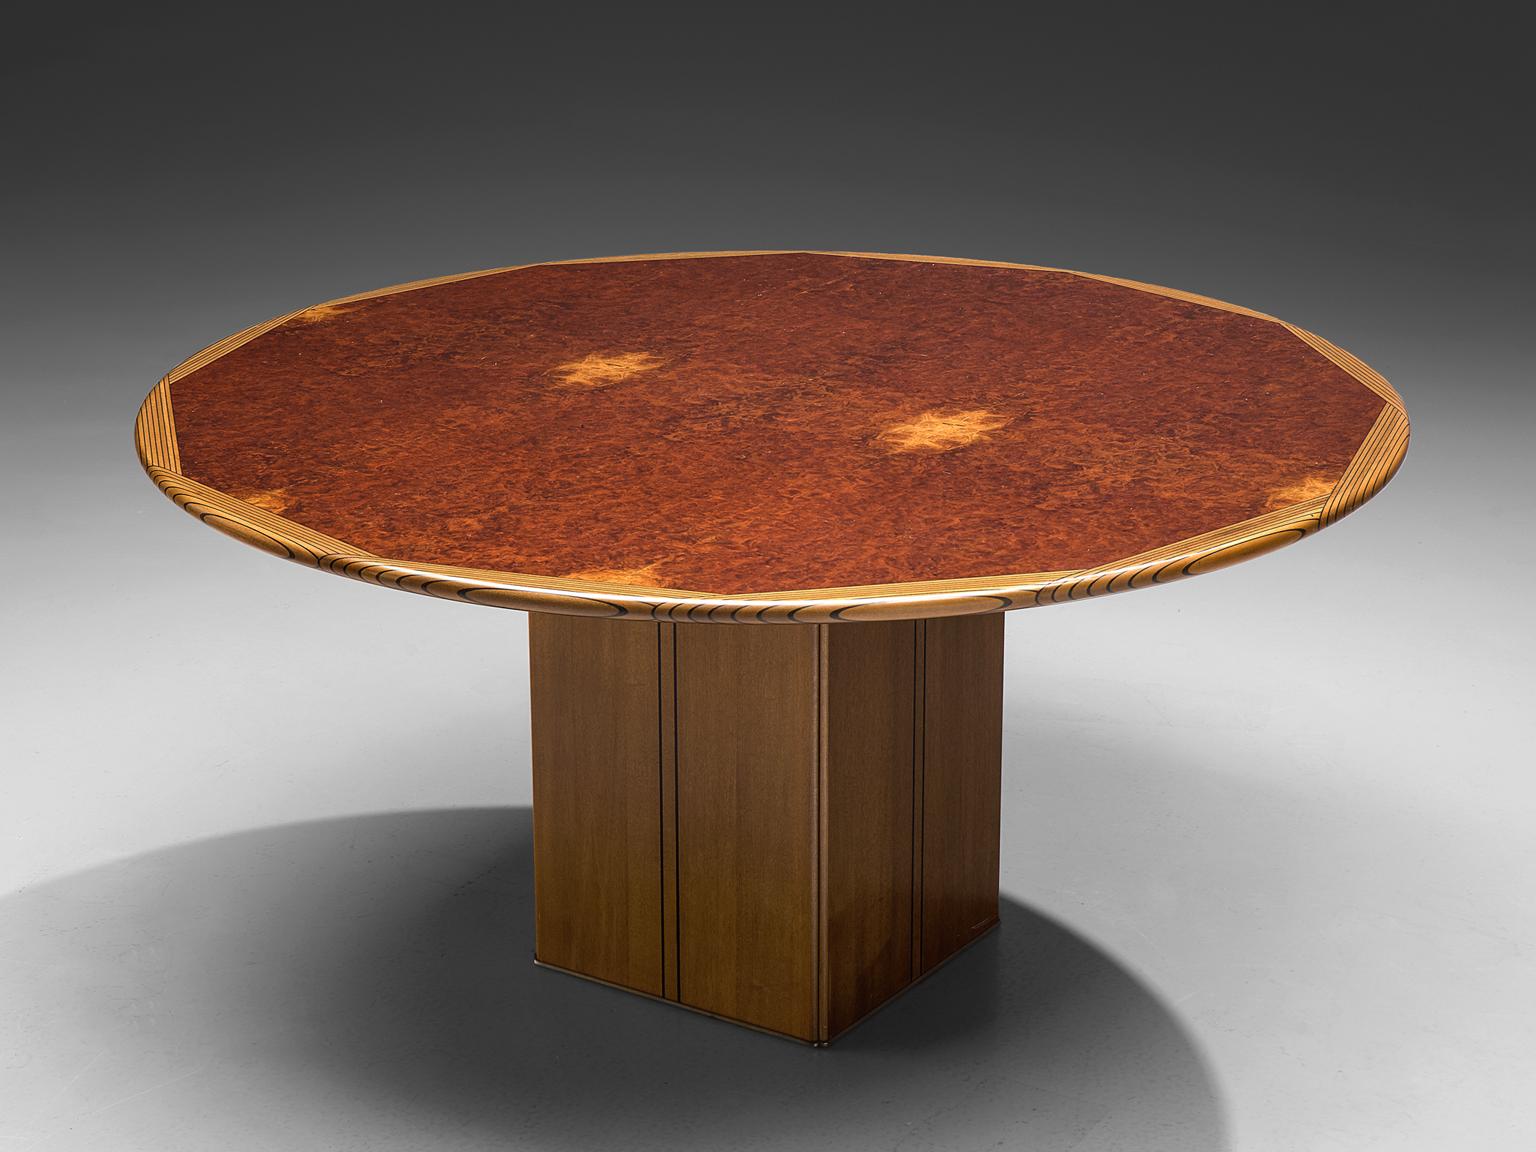 Afra & Tobia Scarpa from Maxalto, dining table from the Africa series, burl, walnut, ebony, Italy, 1975.

This table is by Afra & Tobia Scarpa and is titled 'Africa' and is part of the Artona collection by Maxalto. The table is designed with a